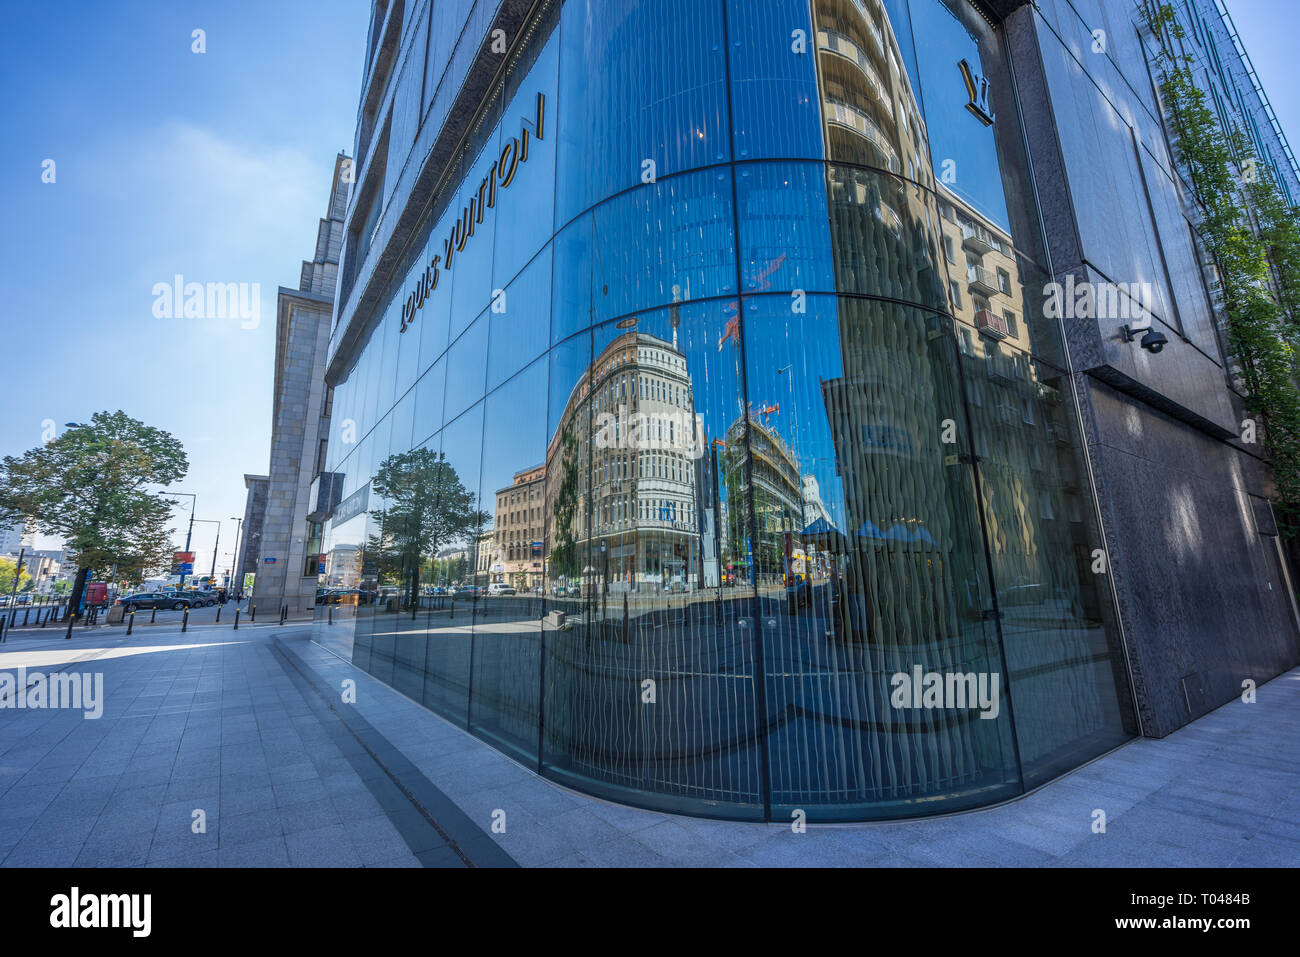 Warsaw, Poland - July 24, 2017 : Reflections on the facade of